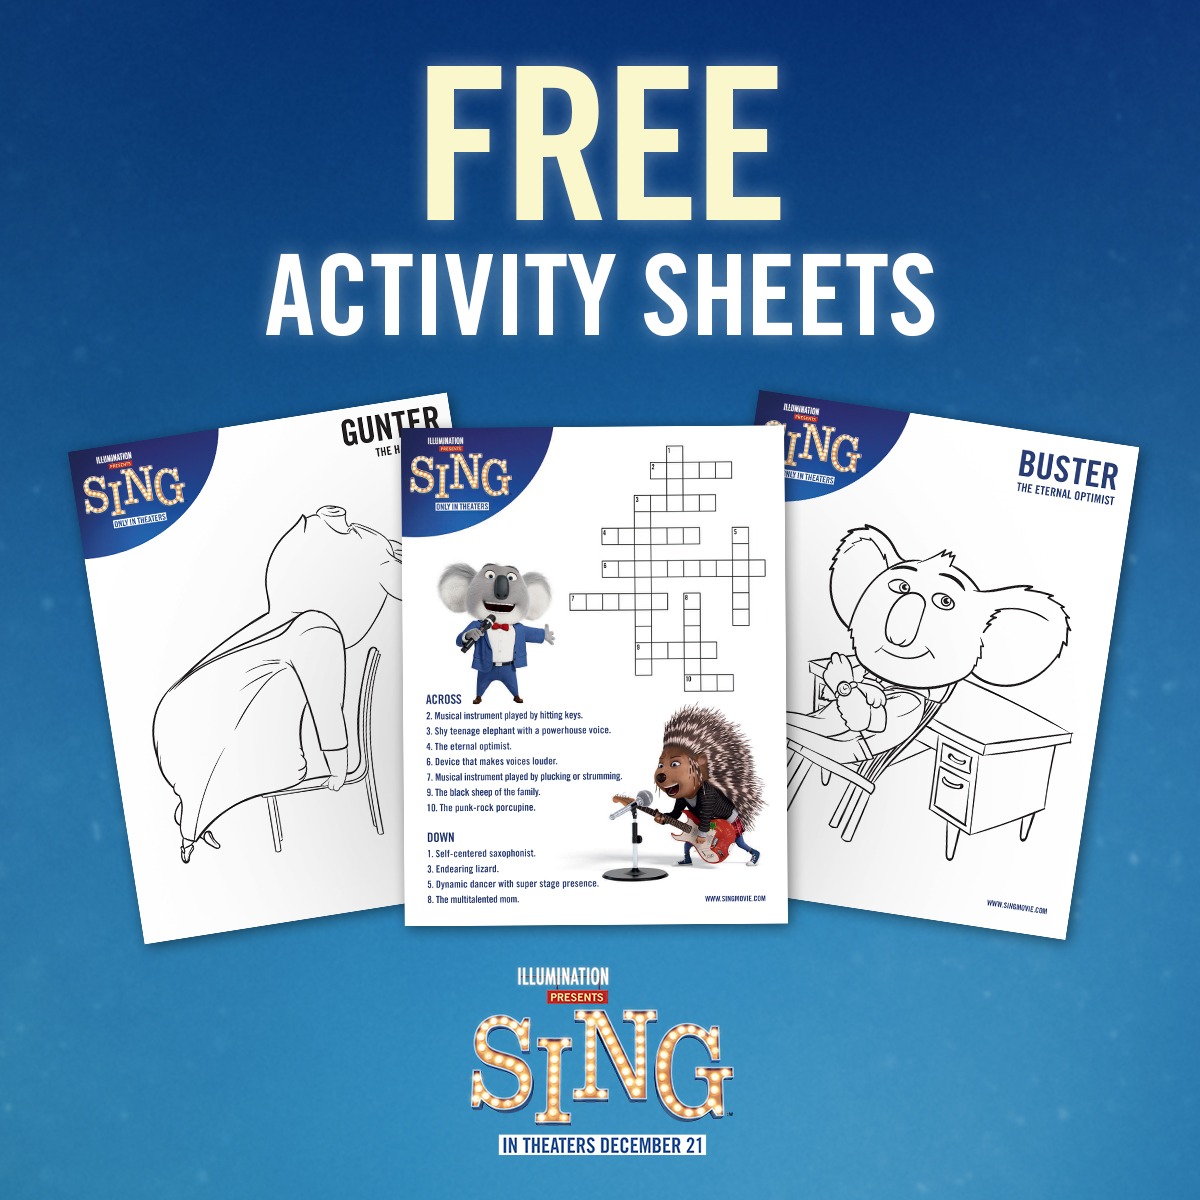 Get your children excited for the release of Sing this December 21st with these fun and free activity sheet printables!